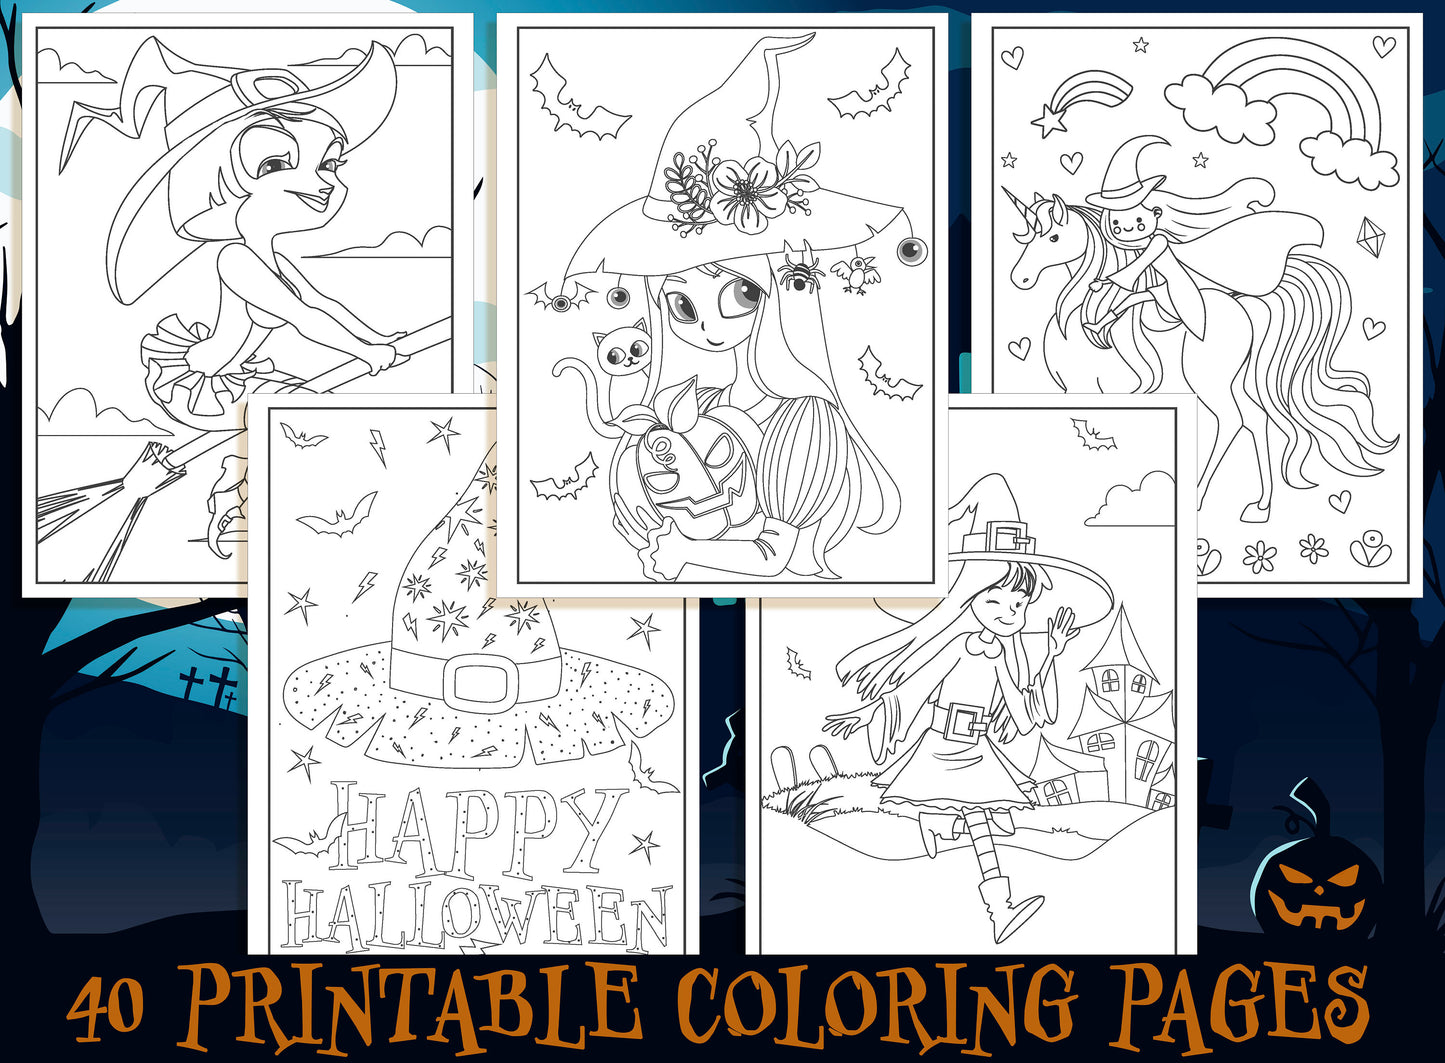 Witch Coloring Pages - 40 Printable Witch Coloring Pages for Kids, Girls, Boys, Teens. Witch & Halloween Party Activity - Instant Download.